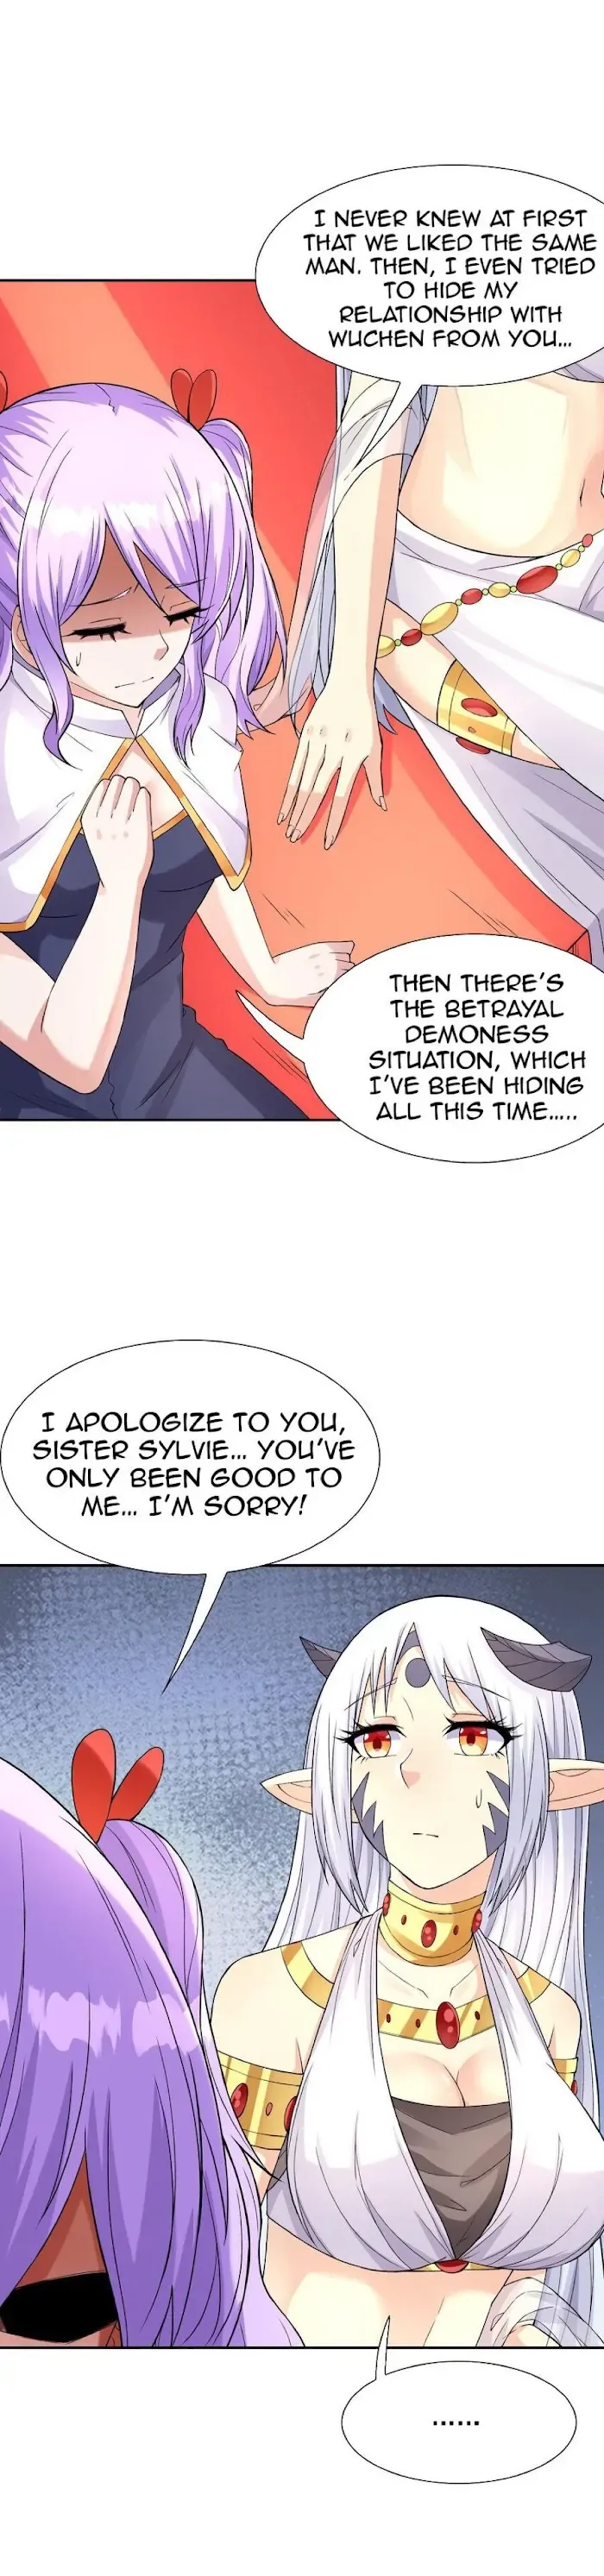 My Harem Consists Entirely of Female Demon Villains Chapter 43 page 26